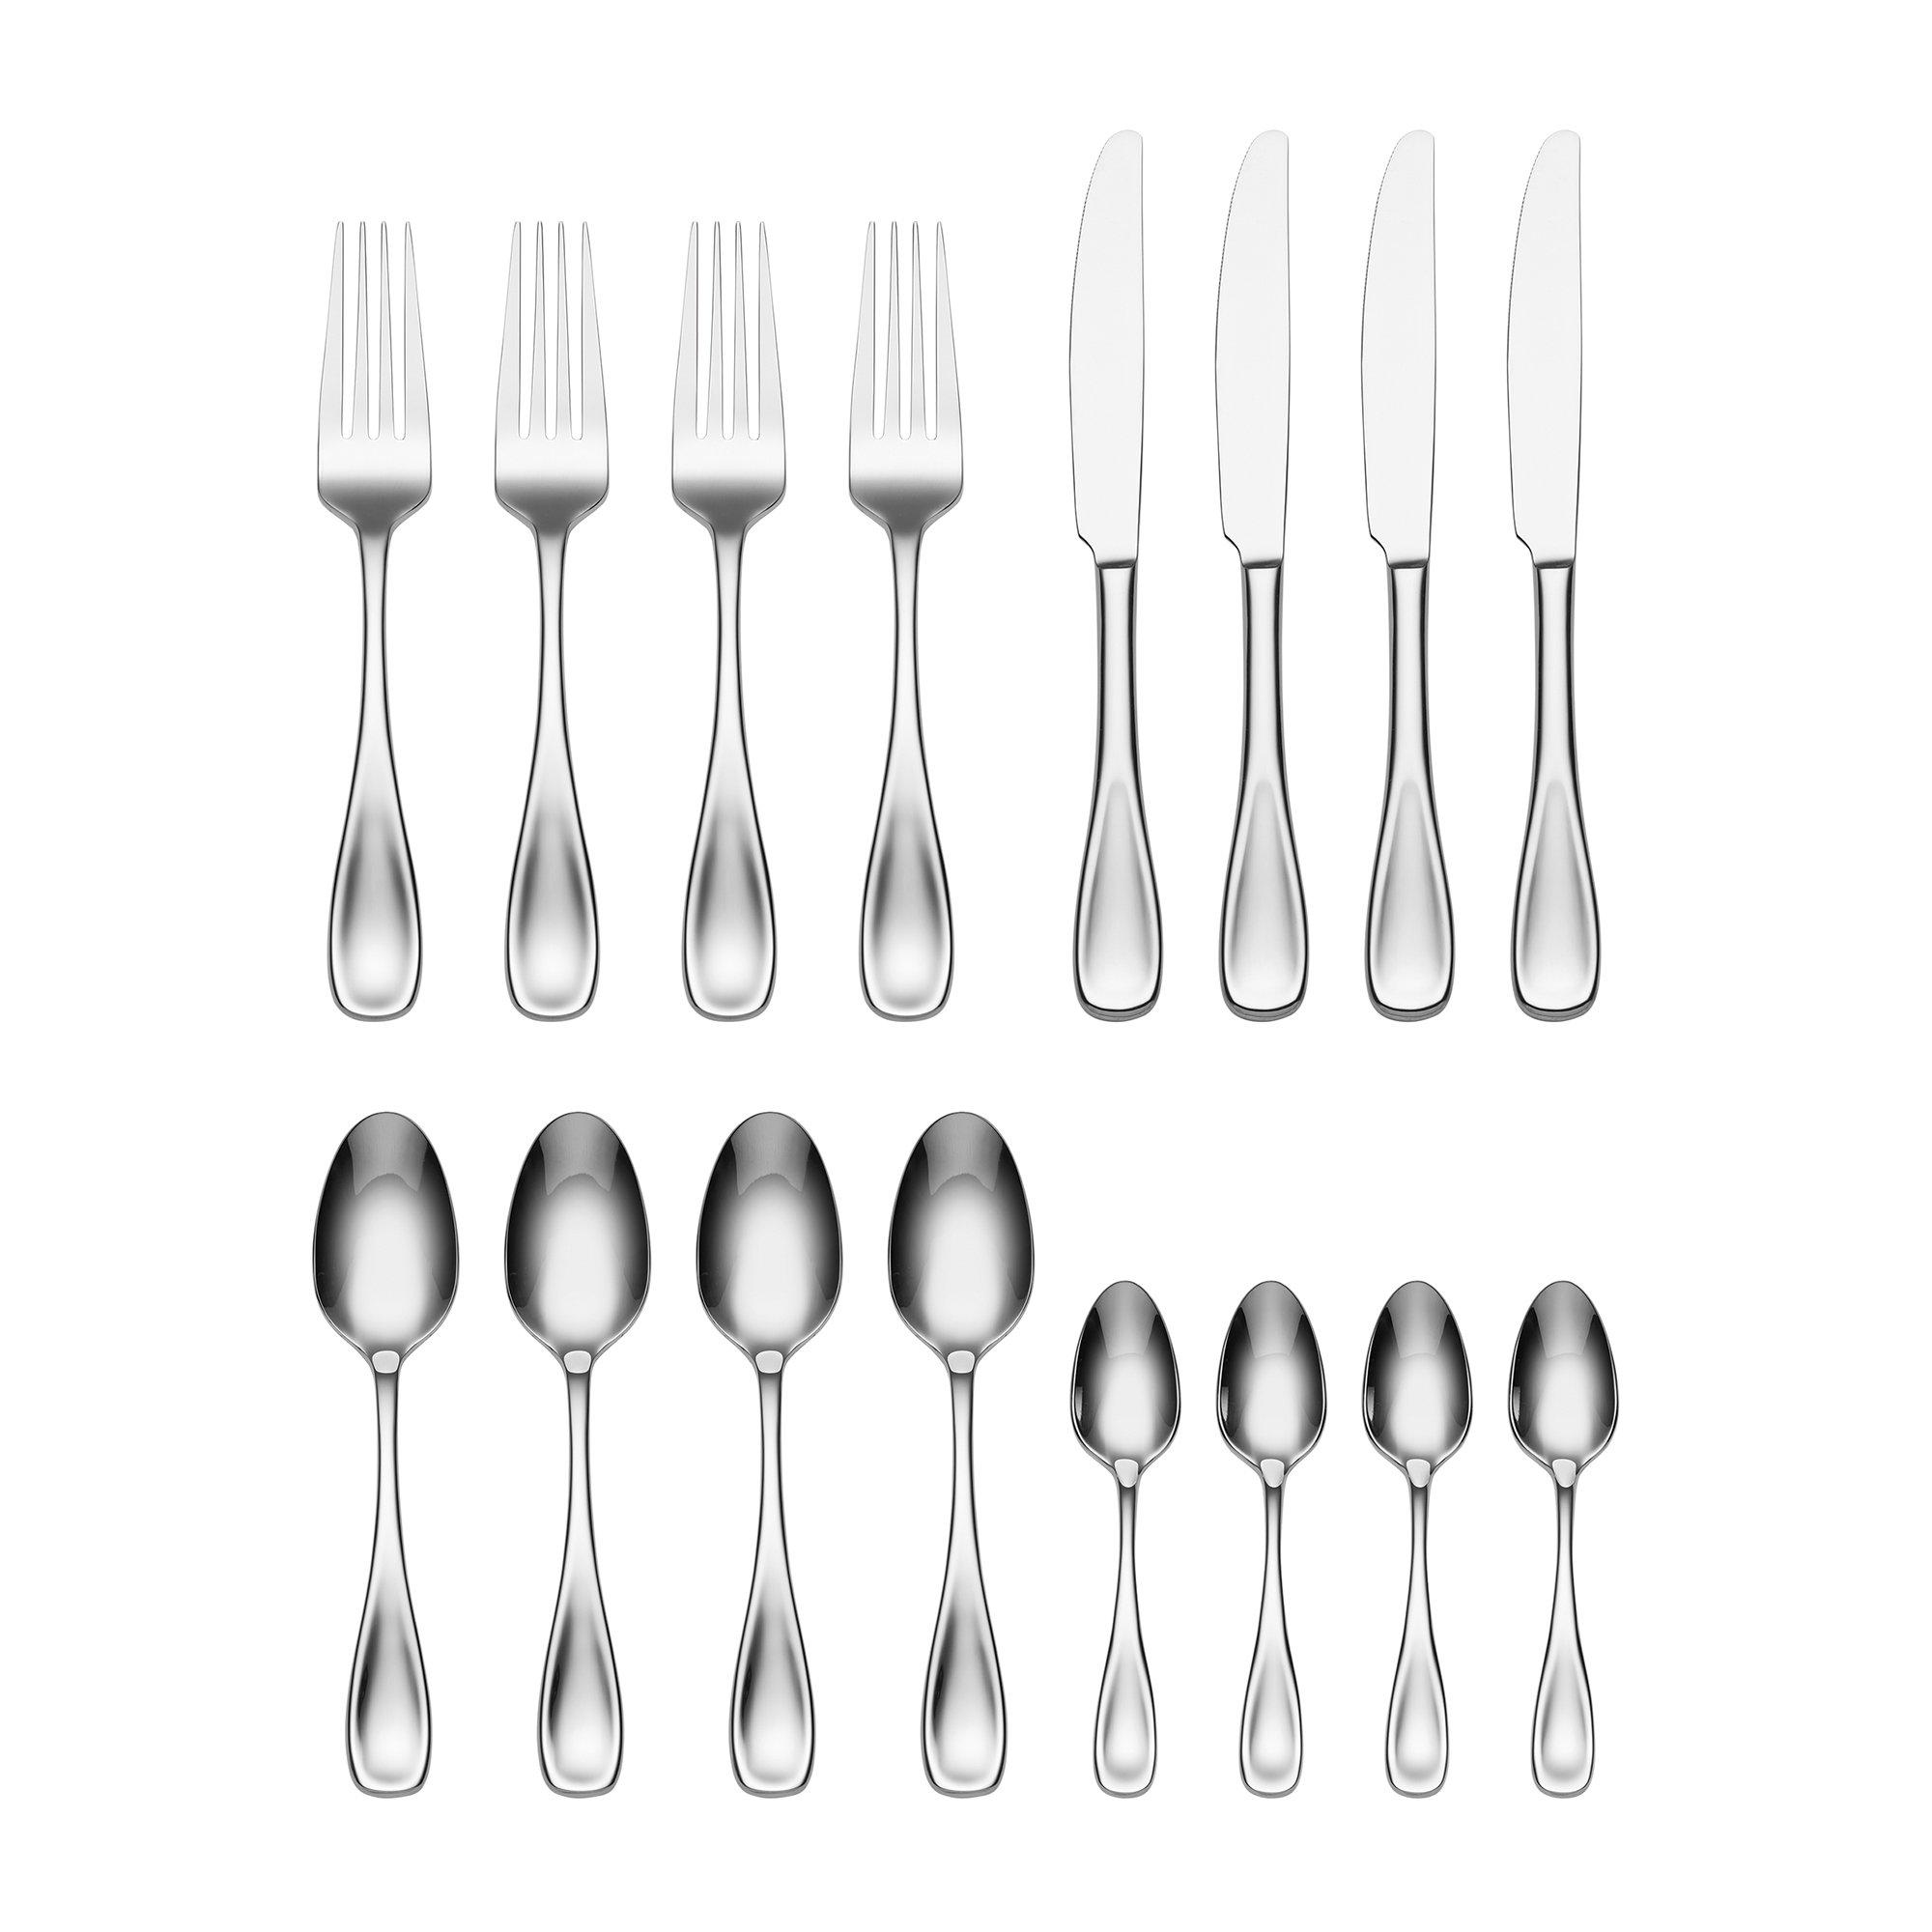 Voss 16 Piece Culterly Set, Stainless Steel, Rust Resistant, Dishwasher Safe